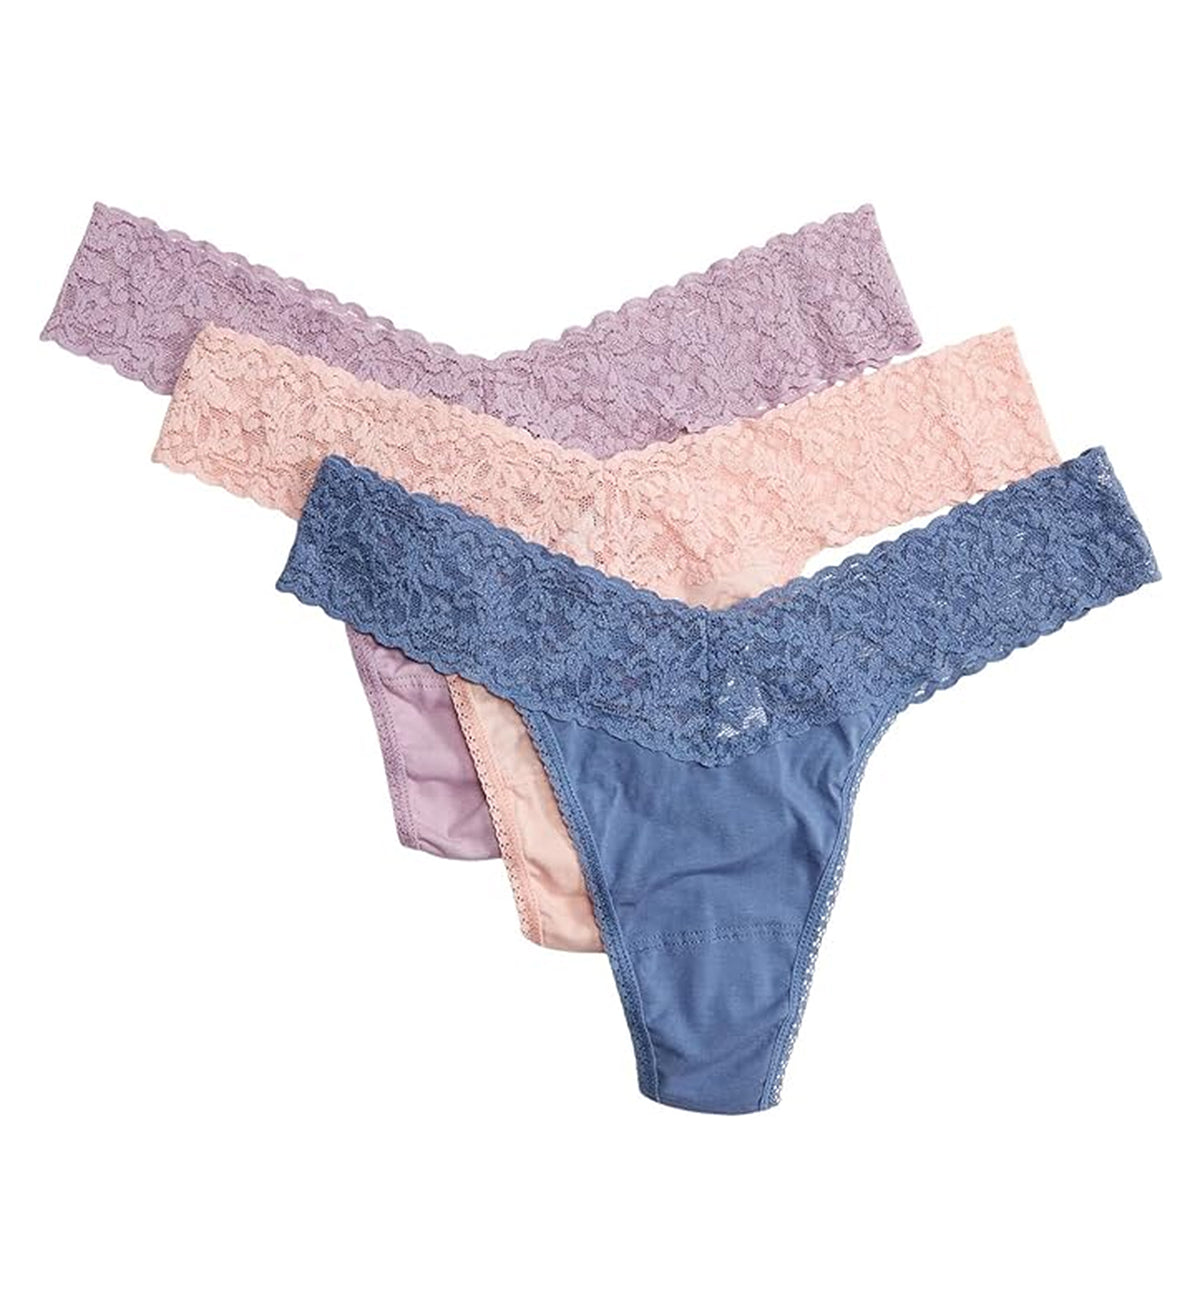 Hanky Panky 3-PACK Original Rise Cotton Thong (89183TPK),Holiday23 FCMB - FCMB,One Size